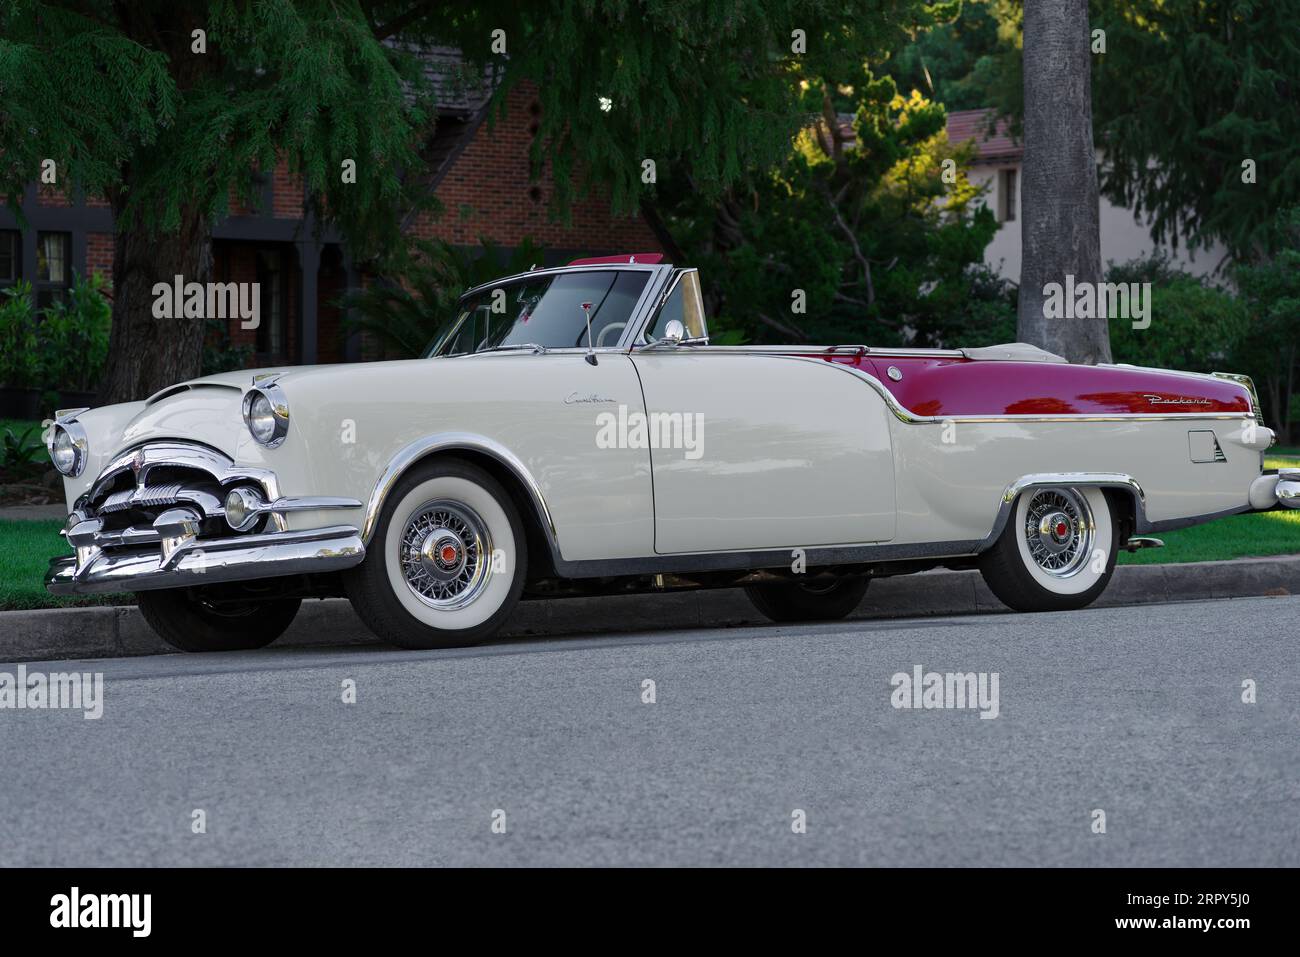 Classic Packard Caribbean convertible car shown parked in a residential area. Stock Photo